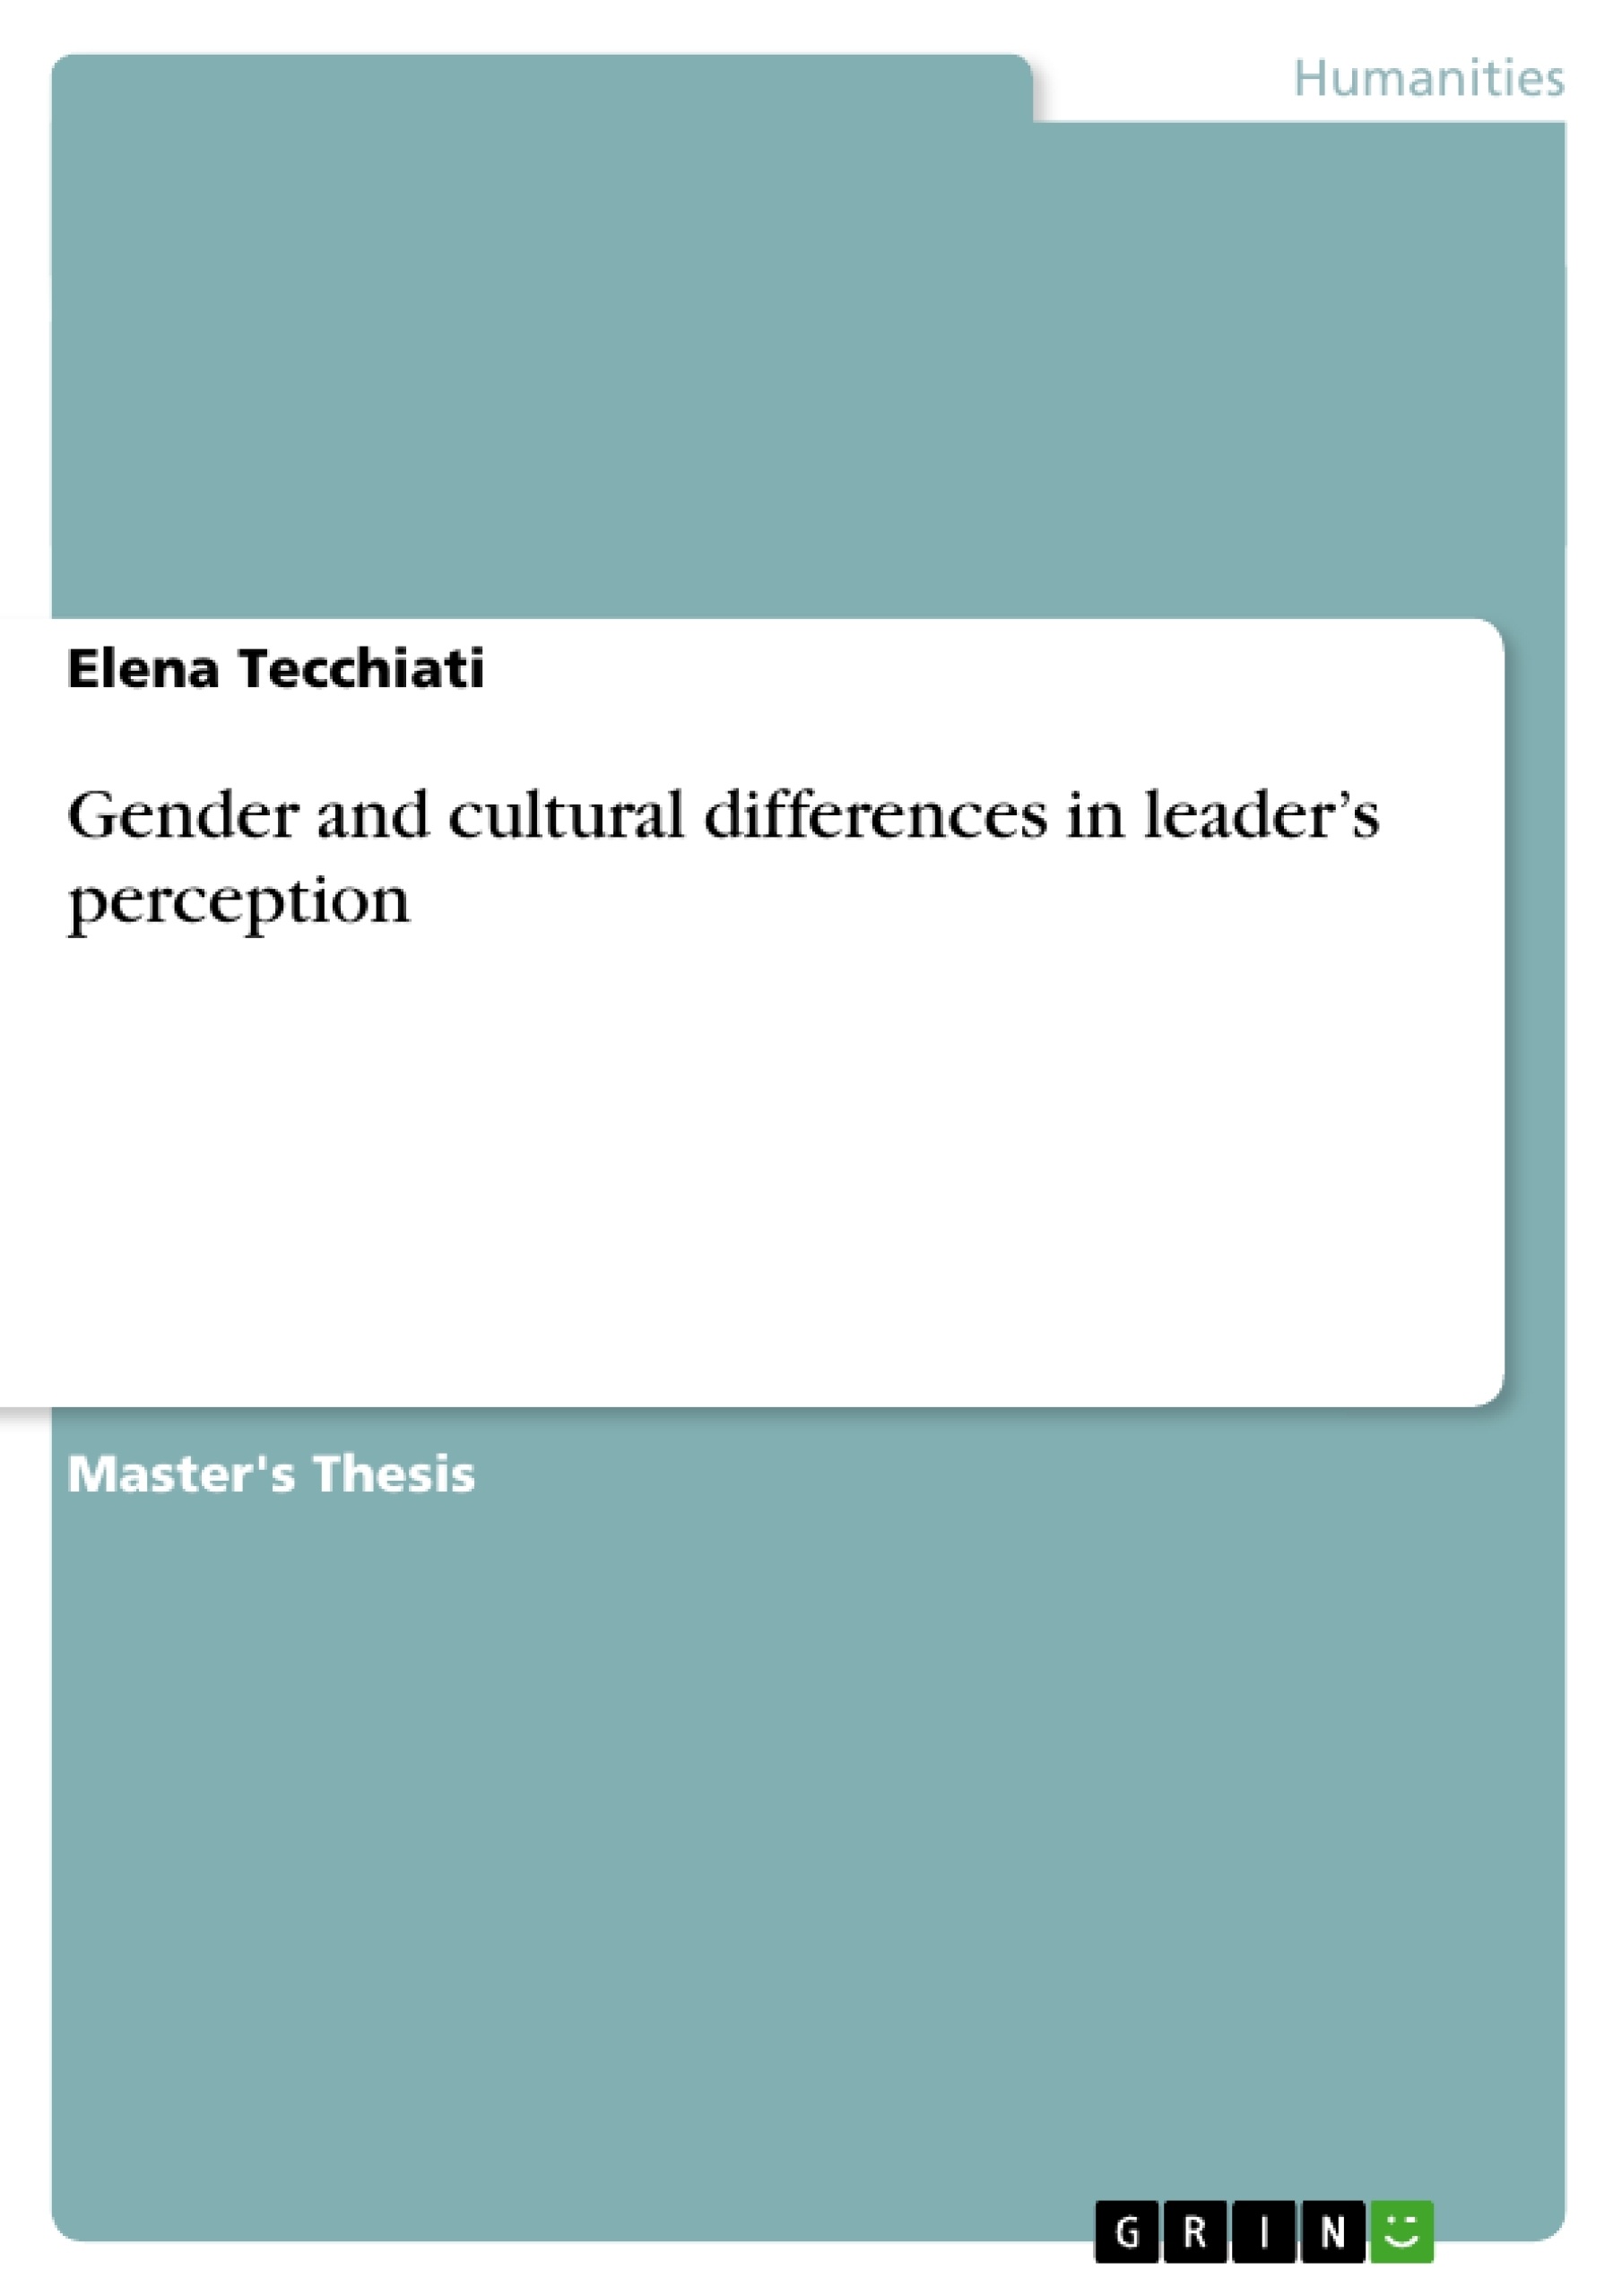 Title: Gender and cultural differences in leader’s perception